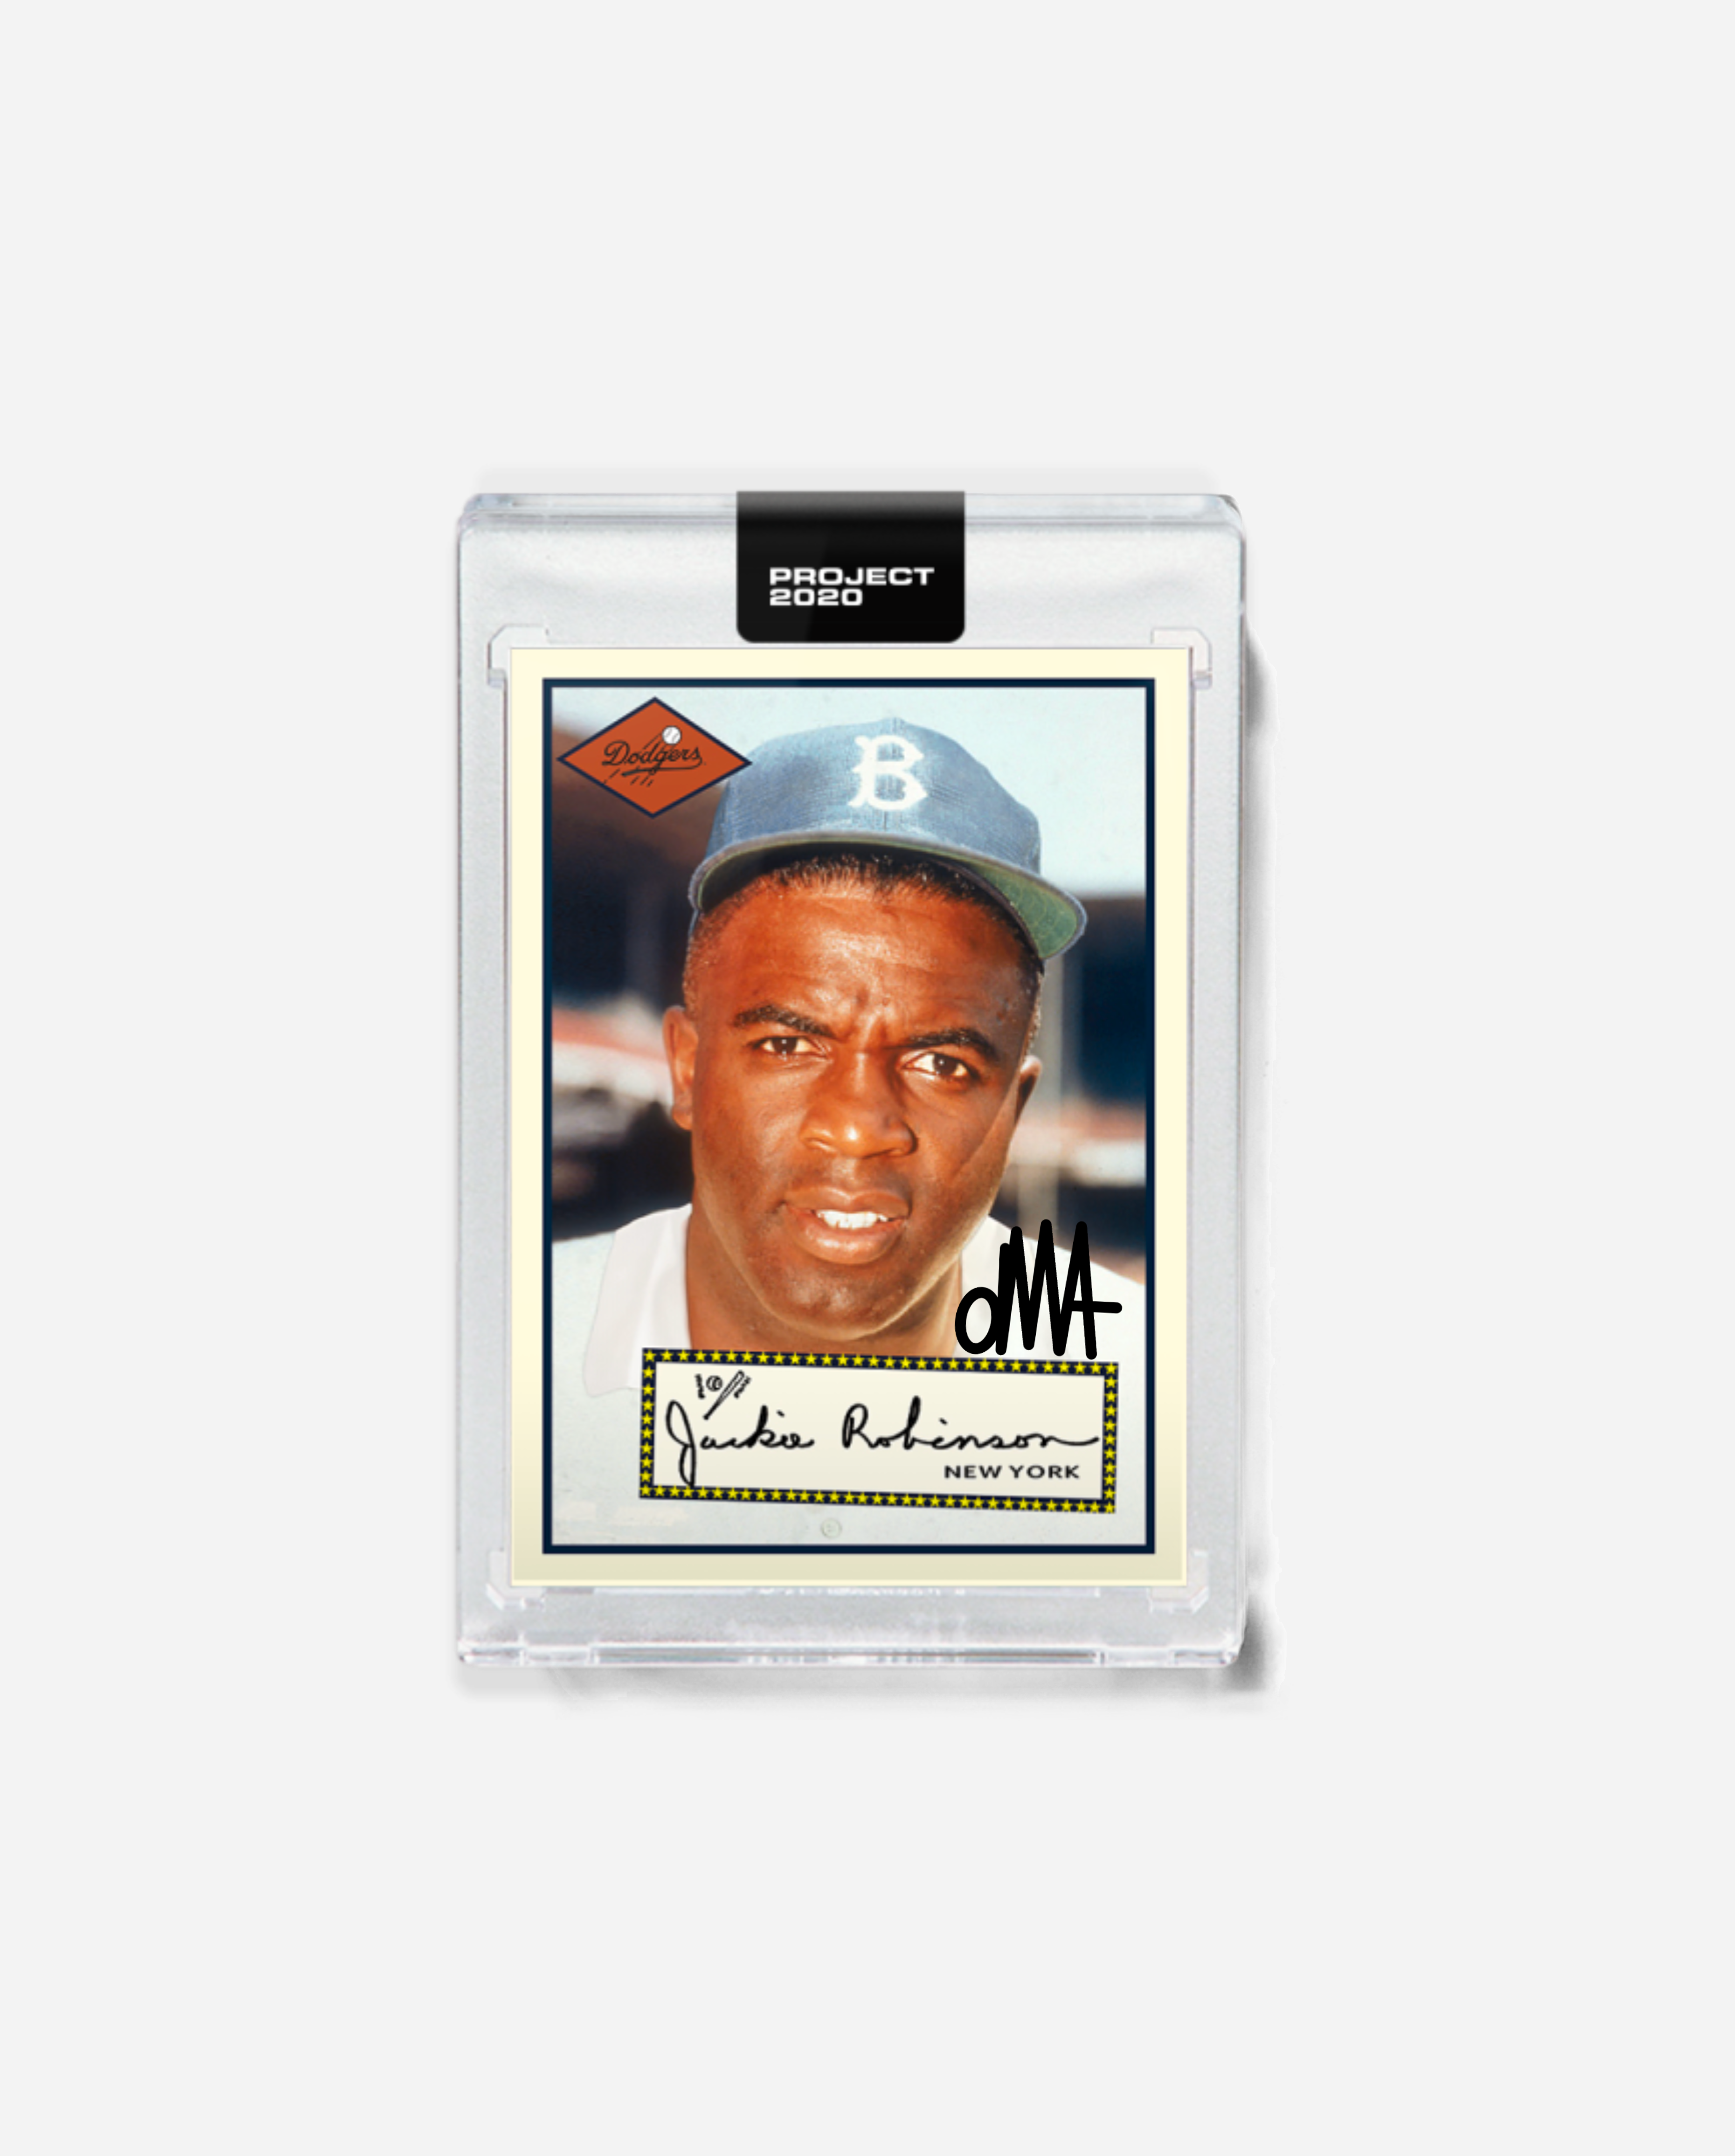 Jackie Robinson x oMA x Topps Project 2020 Autographed Card